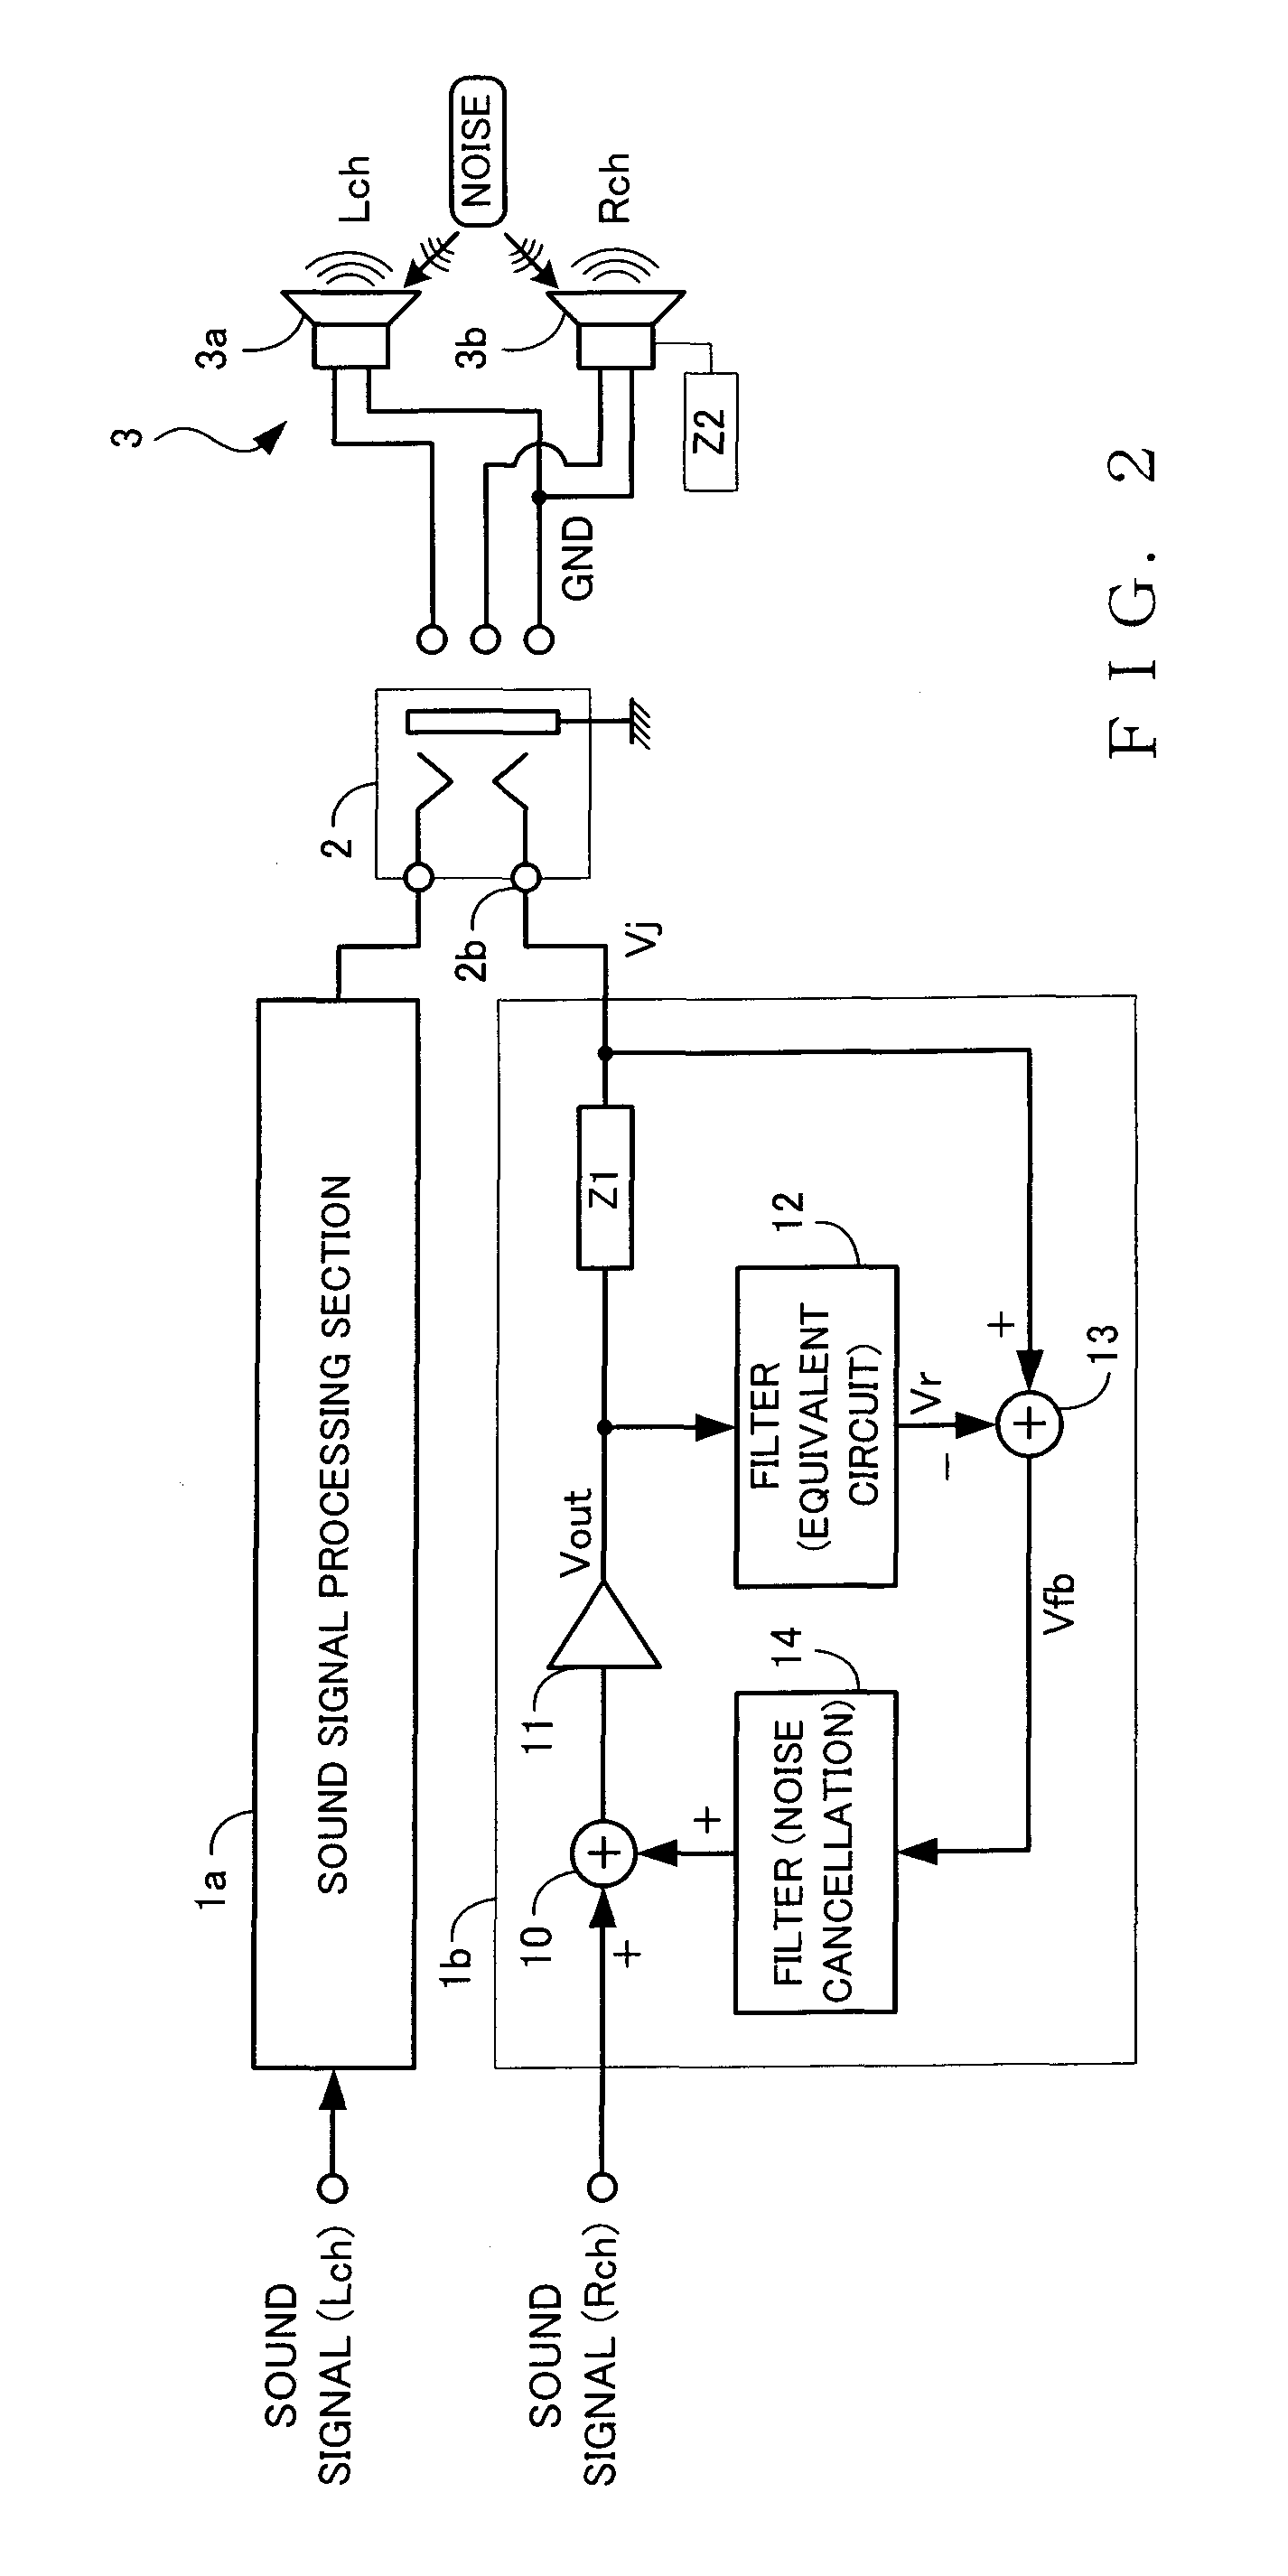 Ambient noise removal device